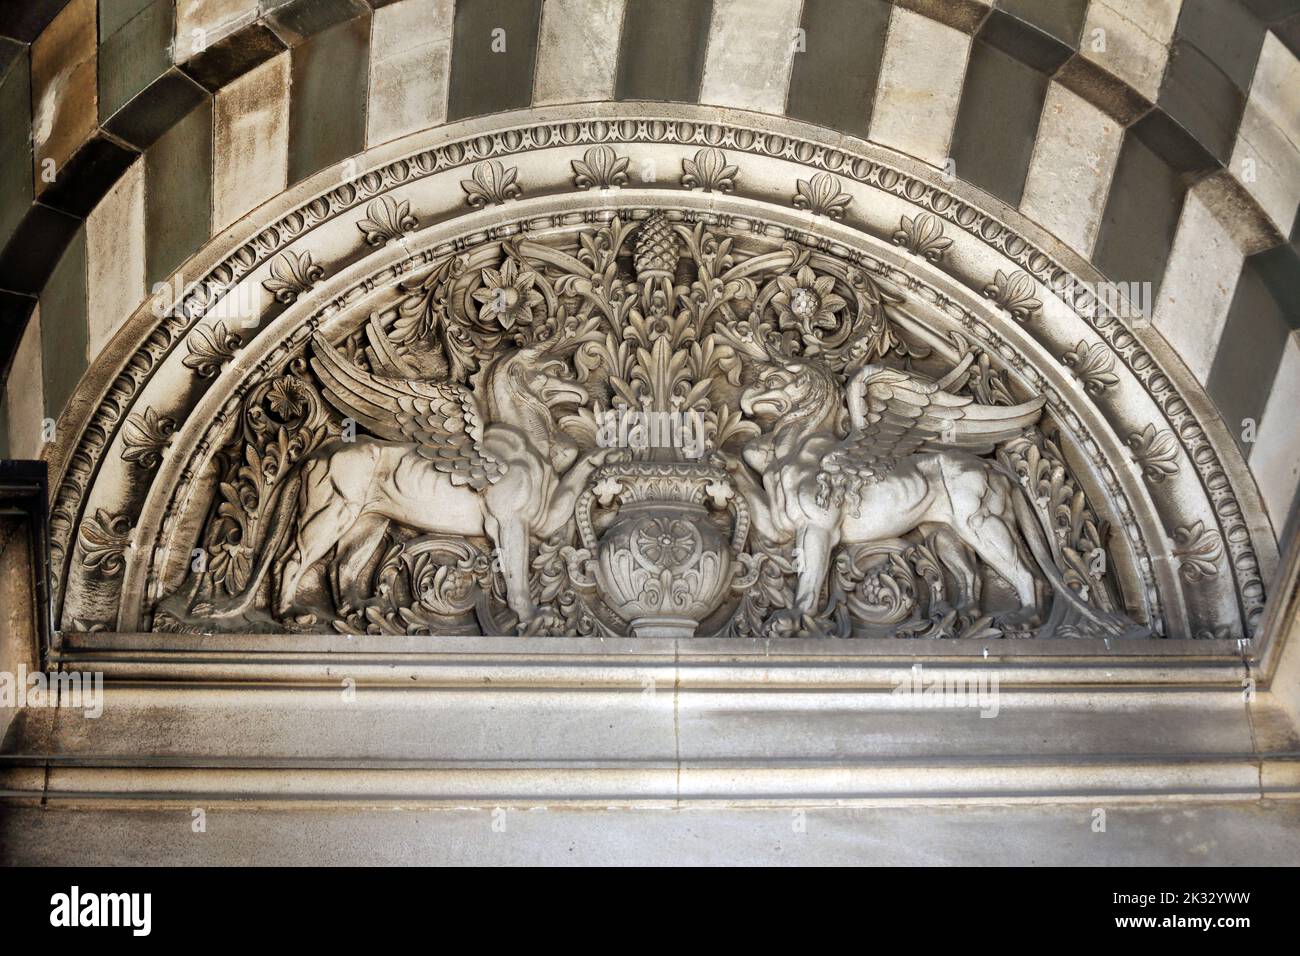 Cathedrale Sainte-Marie-Majeure (Cathedral of Saint Mary Major) Detail of Winged Horse like Creatures above Entrance Marseille France Stock Photo